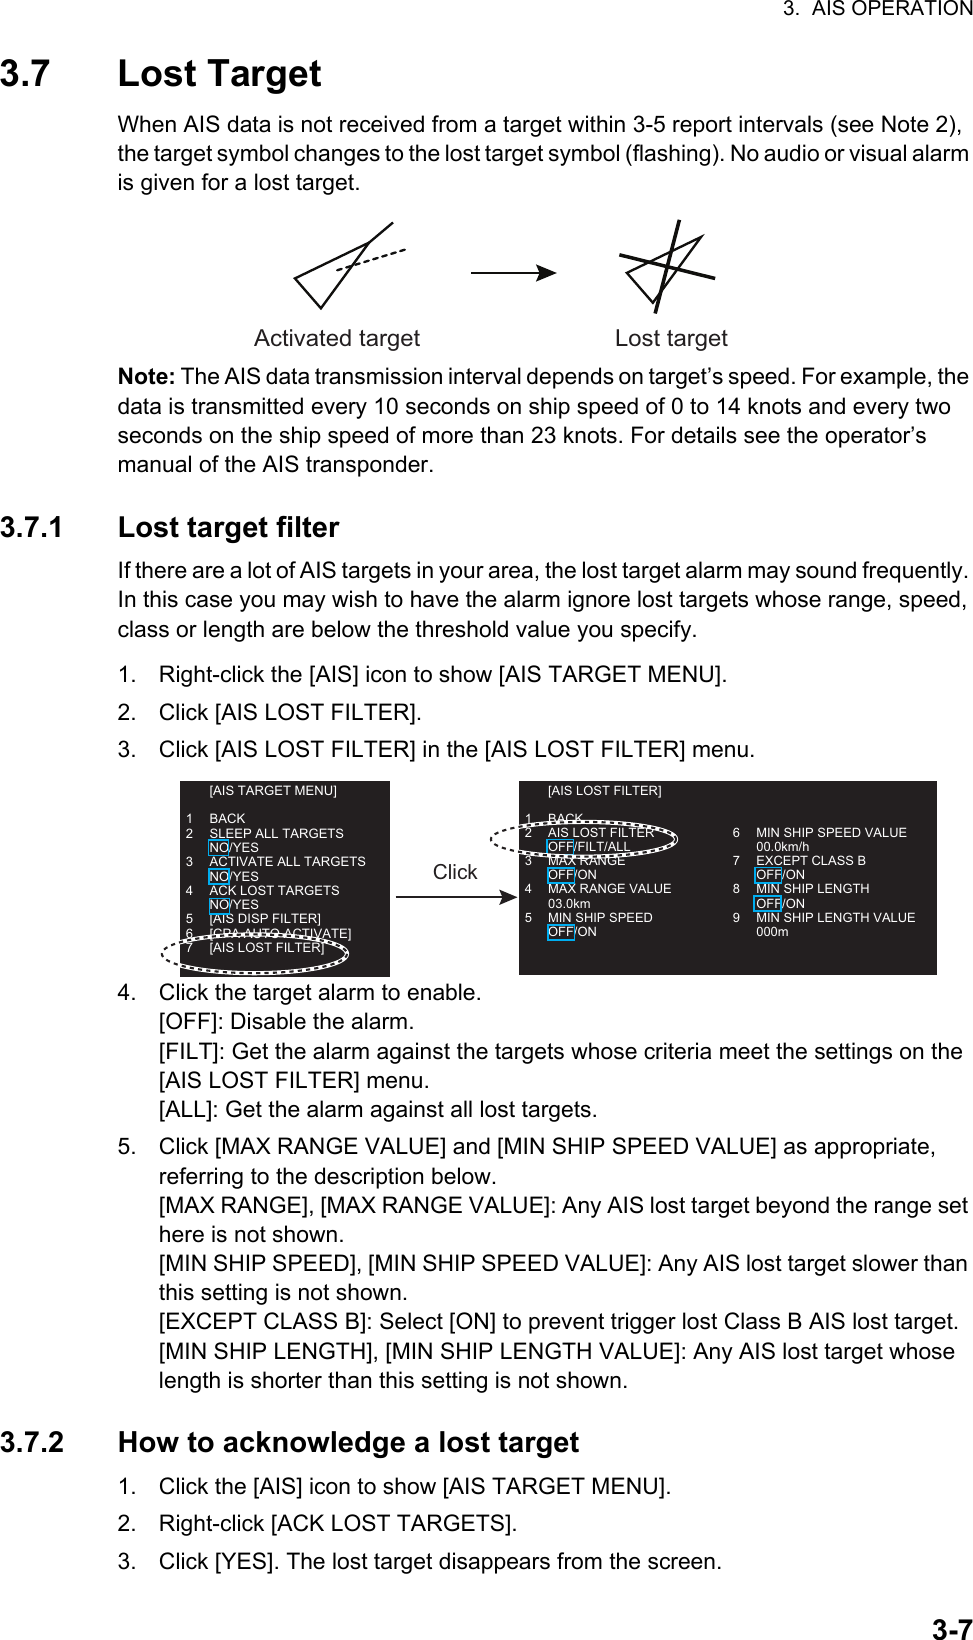 3.  AIS OPERATION3-73.7 Lost TargetWhen AIS data is not received from a target within 3-5 report intervals (see Note 2), the target symbol changes to the lost target symbol (flashing). No audio or visual alarm is given for a lost target.Note: The AIS data transmission interval depends on target’s speed. For example, the data is transmitted every 10 seconds on ship speed of 0 to 14 knots and every two seconds on the ship speed of more than 23 knots. For details see the operator’s    manual of the AIS transponder.3.7.1 Lost target filterIf there are a lot of AIS targets in your area, the lost target alarm may sound frequently. In this case you may wish to have the alarm ignore lost targets whose range, speed, class or length are below the threshold value you specify.1. Right-click the [AIS] icon to show [AIS TARGET MENU].2. Click [AIS LOST FILTER].3. Click [AIS LOST FILTER] in the [AIS LOST FILTER] menu.4. Click the target alarm to enable.[OFF]: Disable the alarm.[FILT]: Get the alarm against the targets whose criteria meet the settings on the [AIS LOST FILTER] menu.[ALL]: Get the alarm against all lost targets.5. Click [MAX RANGE VALUE] and [MIN SHIP SPEED VALUE] as appropriate,      referring to the description below.[MAX RANGE], [MAX RANGE VALUE]: Any AIS lost target beyond the range set here is not shown.[MIN SHIP SPEED], [MIN SHIP SPEED VALUE]: Any AIS lost target slower than this setting is not shown.[EXCEPT CLASS B]: Select [ON] to prevent trigger lost Class B AIS lost target.[MIN SHIP LENGTH], [MIN SHIP LENGTH VALUE]: Any AIS lost target whose length is shorter than this setting is not shown.3.7.2 How to acknowledge a lost target1. Click the [AIS] icon to show [AIS TARGET MENU].2. Right-click [ACK LOST TARGETS].3. Click [YES]. The lost target disappears from the screen.Activated target Lost target  [AIS TARGET MENU]1 BACK2  SLEEP ALL TARGETS NO/YES3  ACTIVATE ALL TARGETS NO/YES4  ACK LOST TARGETS NO/YES5  [AIS DISP FILTER]6  [CPA AUTO ACTIVATE]7  [AIS LOST FILTER]  [AIS LOST FILTER]1 BACK2 AIS LOST FILTER OFF/FILT/ALL3 MAX RANGE OFF/ON4 MAX RANGE VALUE 03.0km5  MIN SHIP SPEED OFF/ON6  MIN SHIP SPEED VALUE 00.0km/h7  EXCEPT CLASS B OFF/ON8  MIN SHIP LENGTH OFF/ON9  MIN SHIP LENGTH VALUE 000mClick